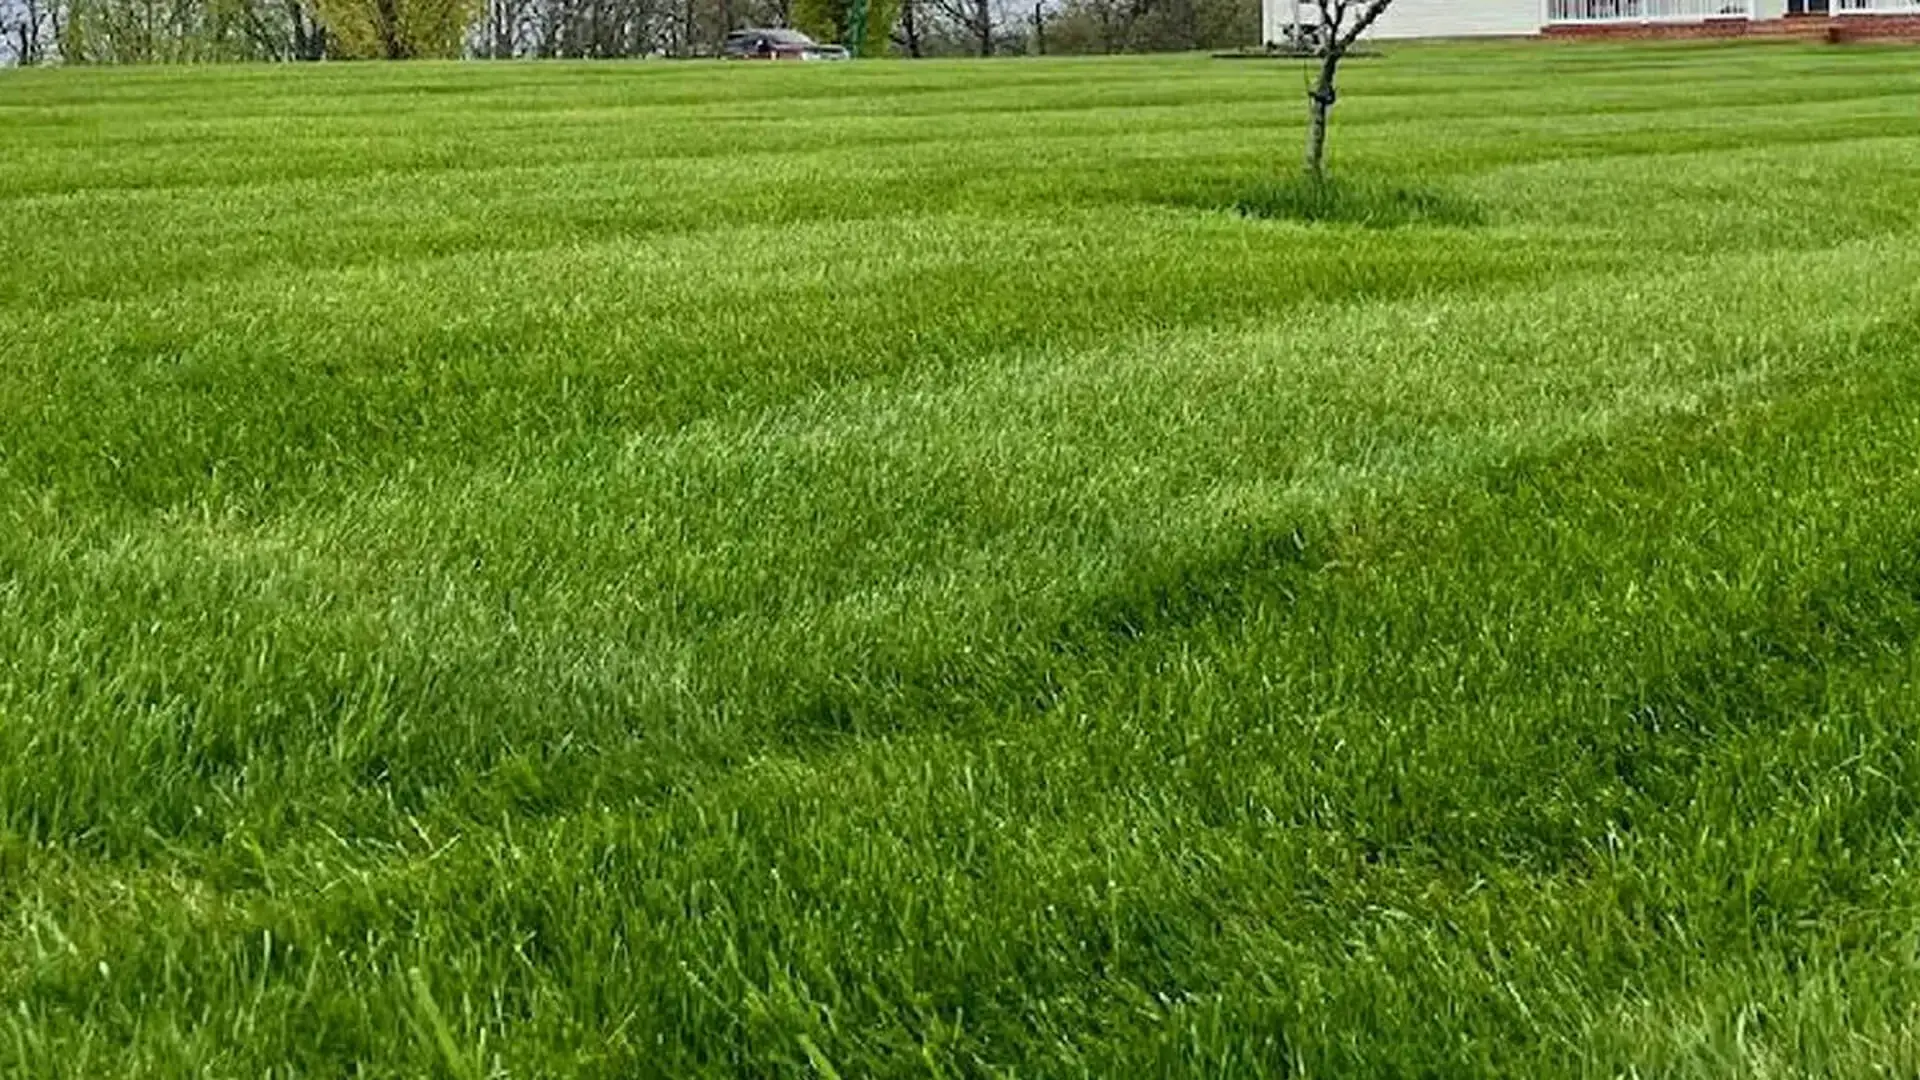 Healthy Mowing Tips for your Lawn